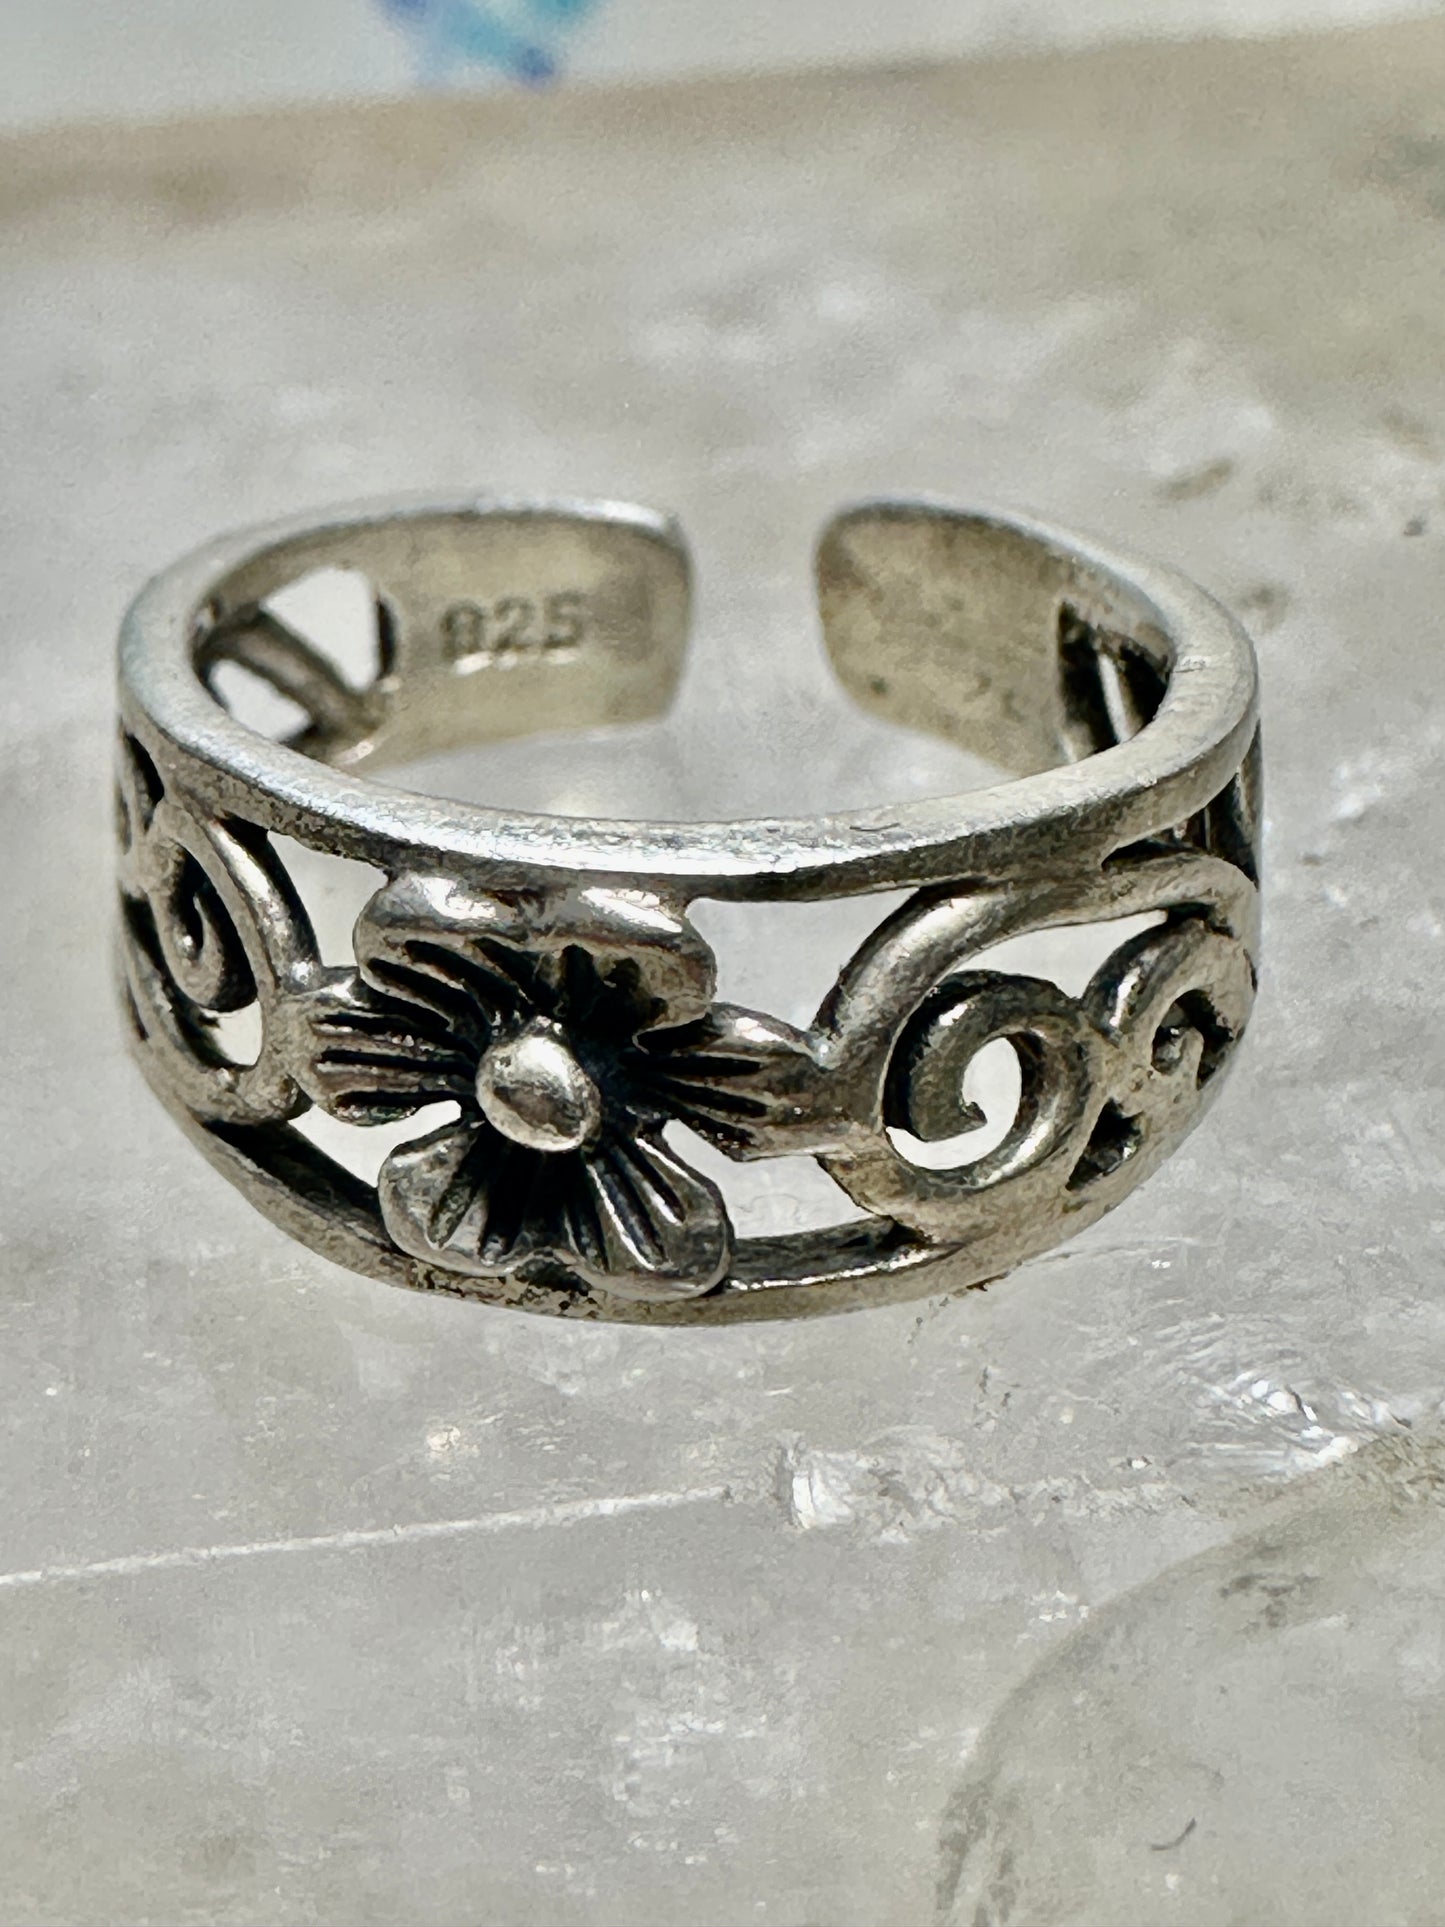 Toe ring flower floral scrollwork band size 3.50 sterling silver women